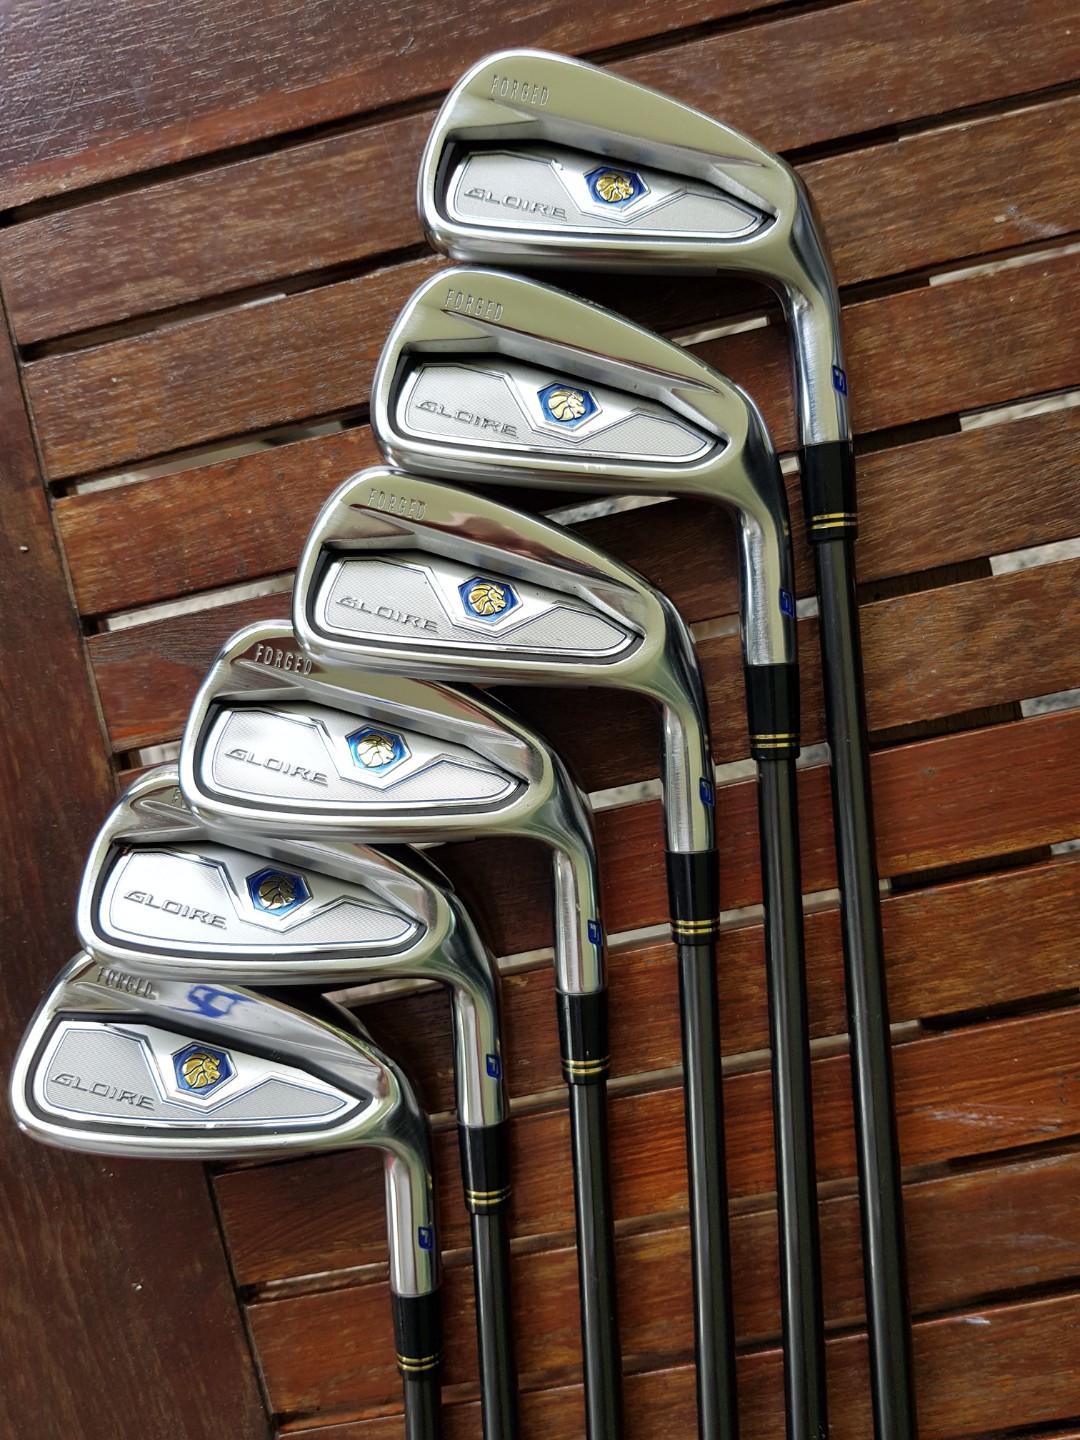 Taylormade Golf Gloire F forged Irons with graphite shaft, Sports 